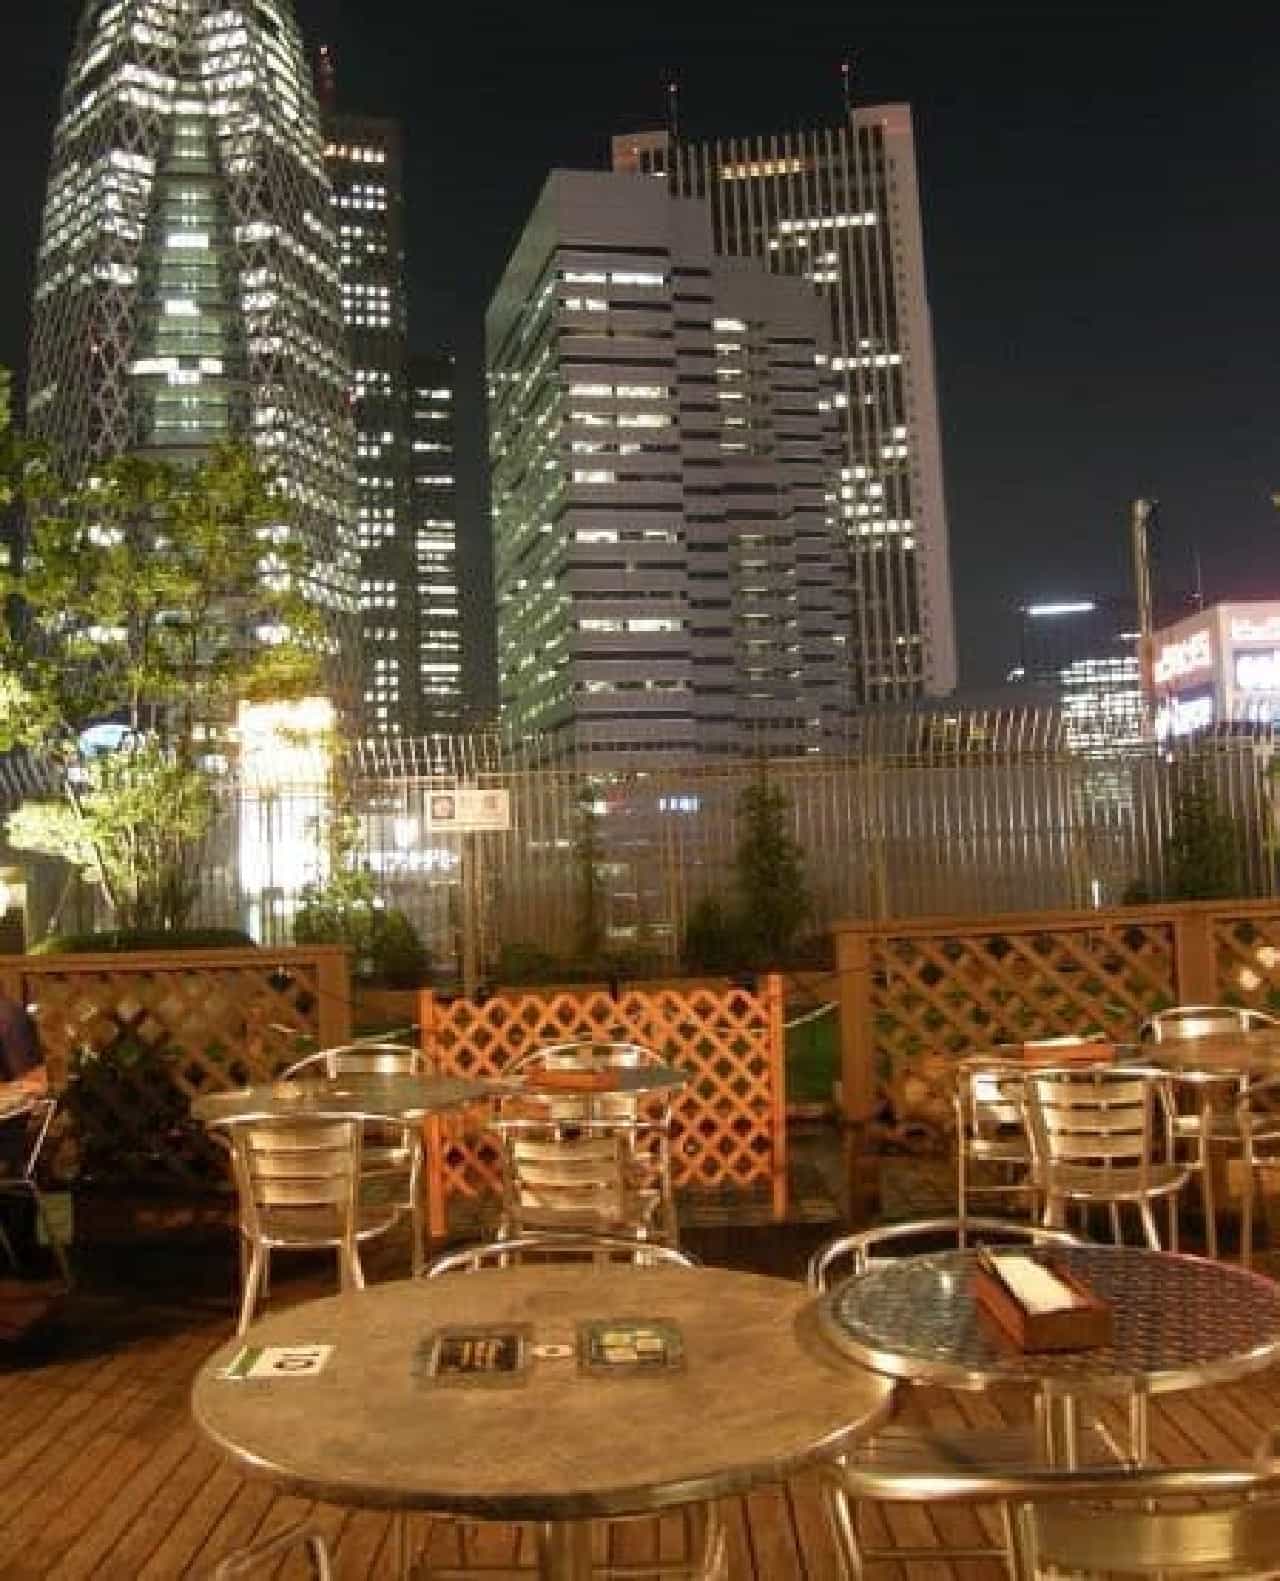 The flower garden is a beer terrace where you can enjoy all-you-can-drink and all-you-can-eat pancakes from 18:00 on weekdays (17:00 on holidays).